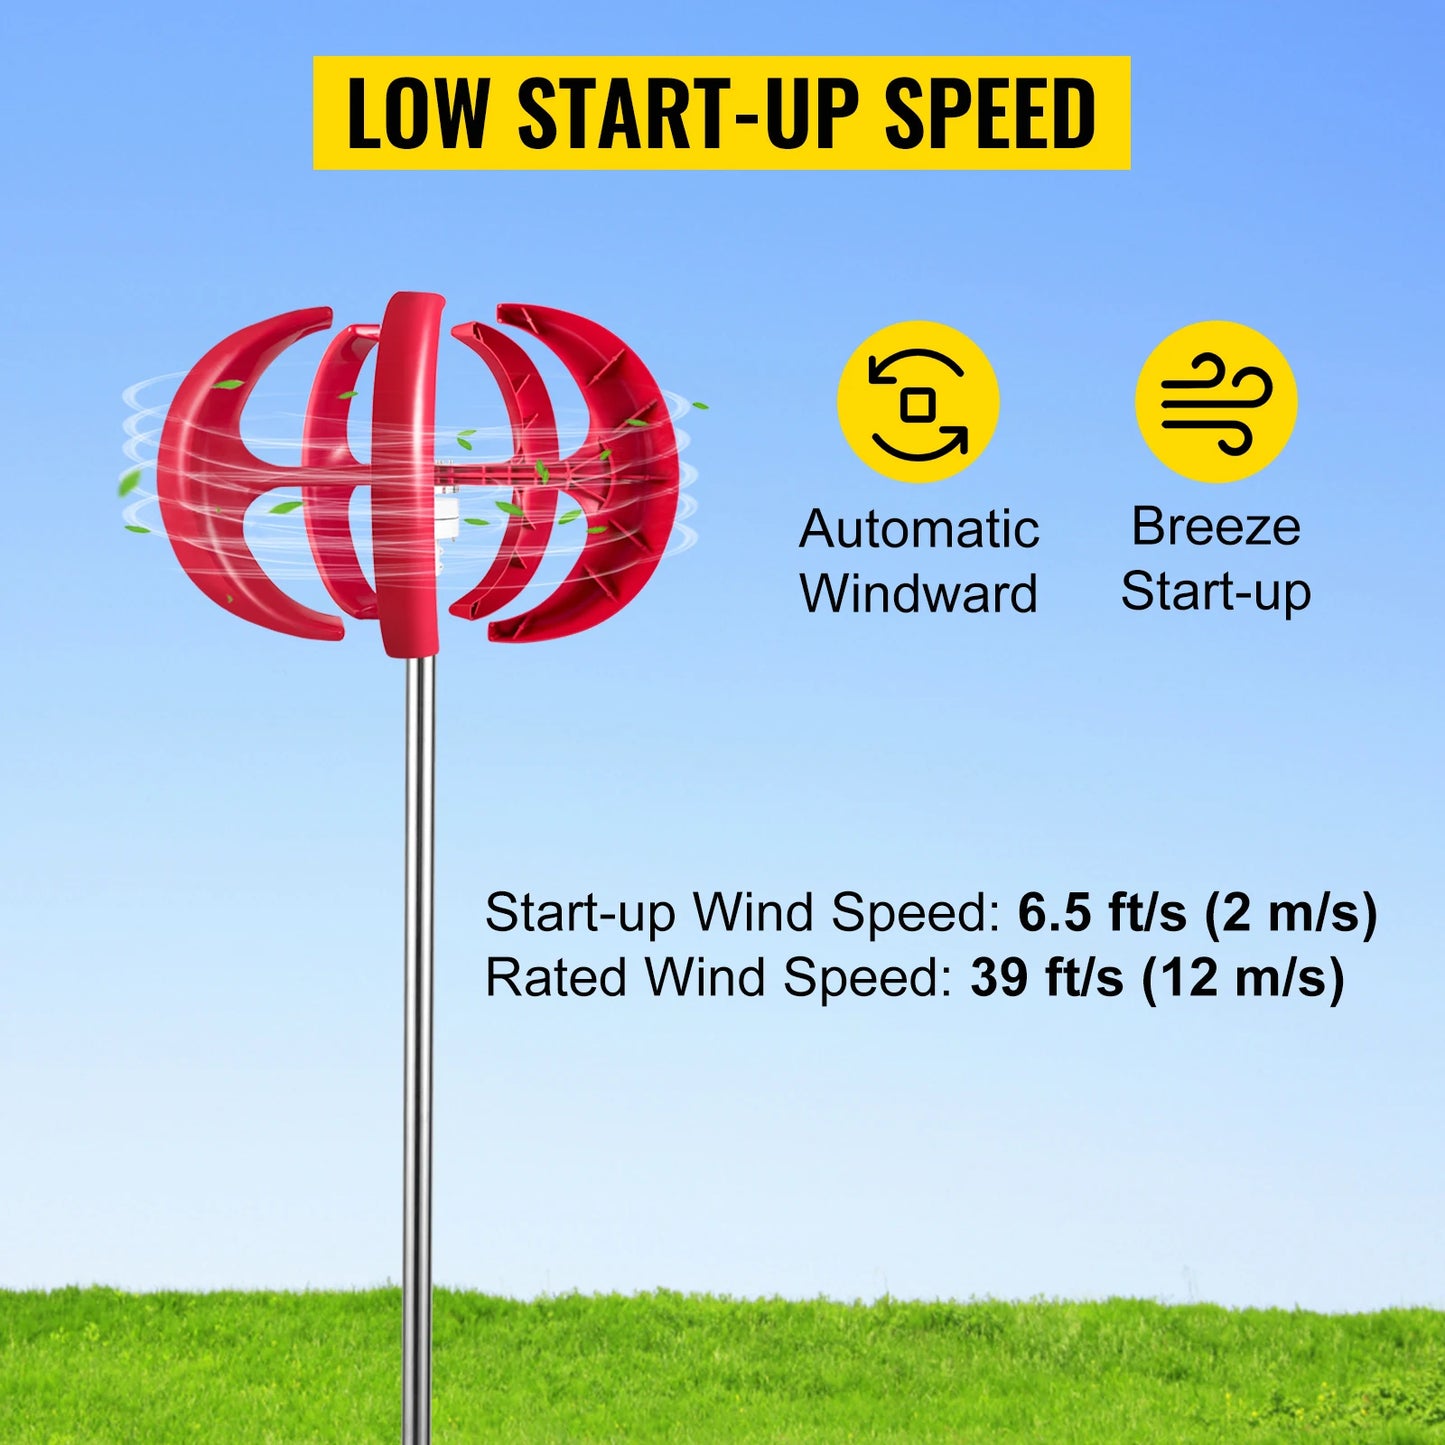 12V 100W/400W/600W Vertical Axis Wind Turbine With Controller